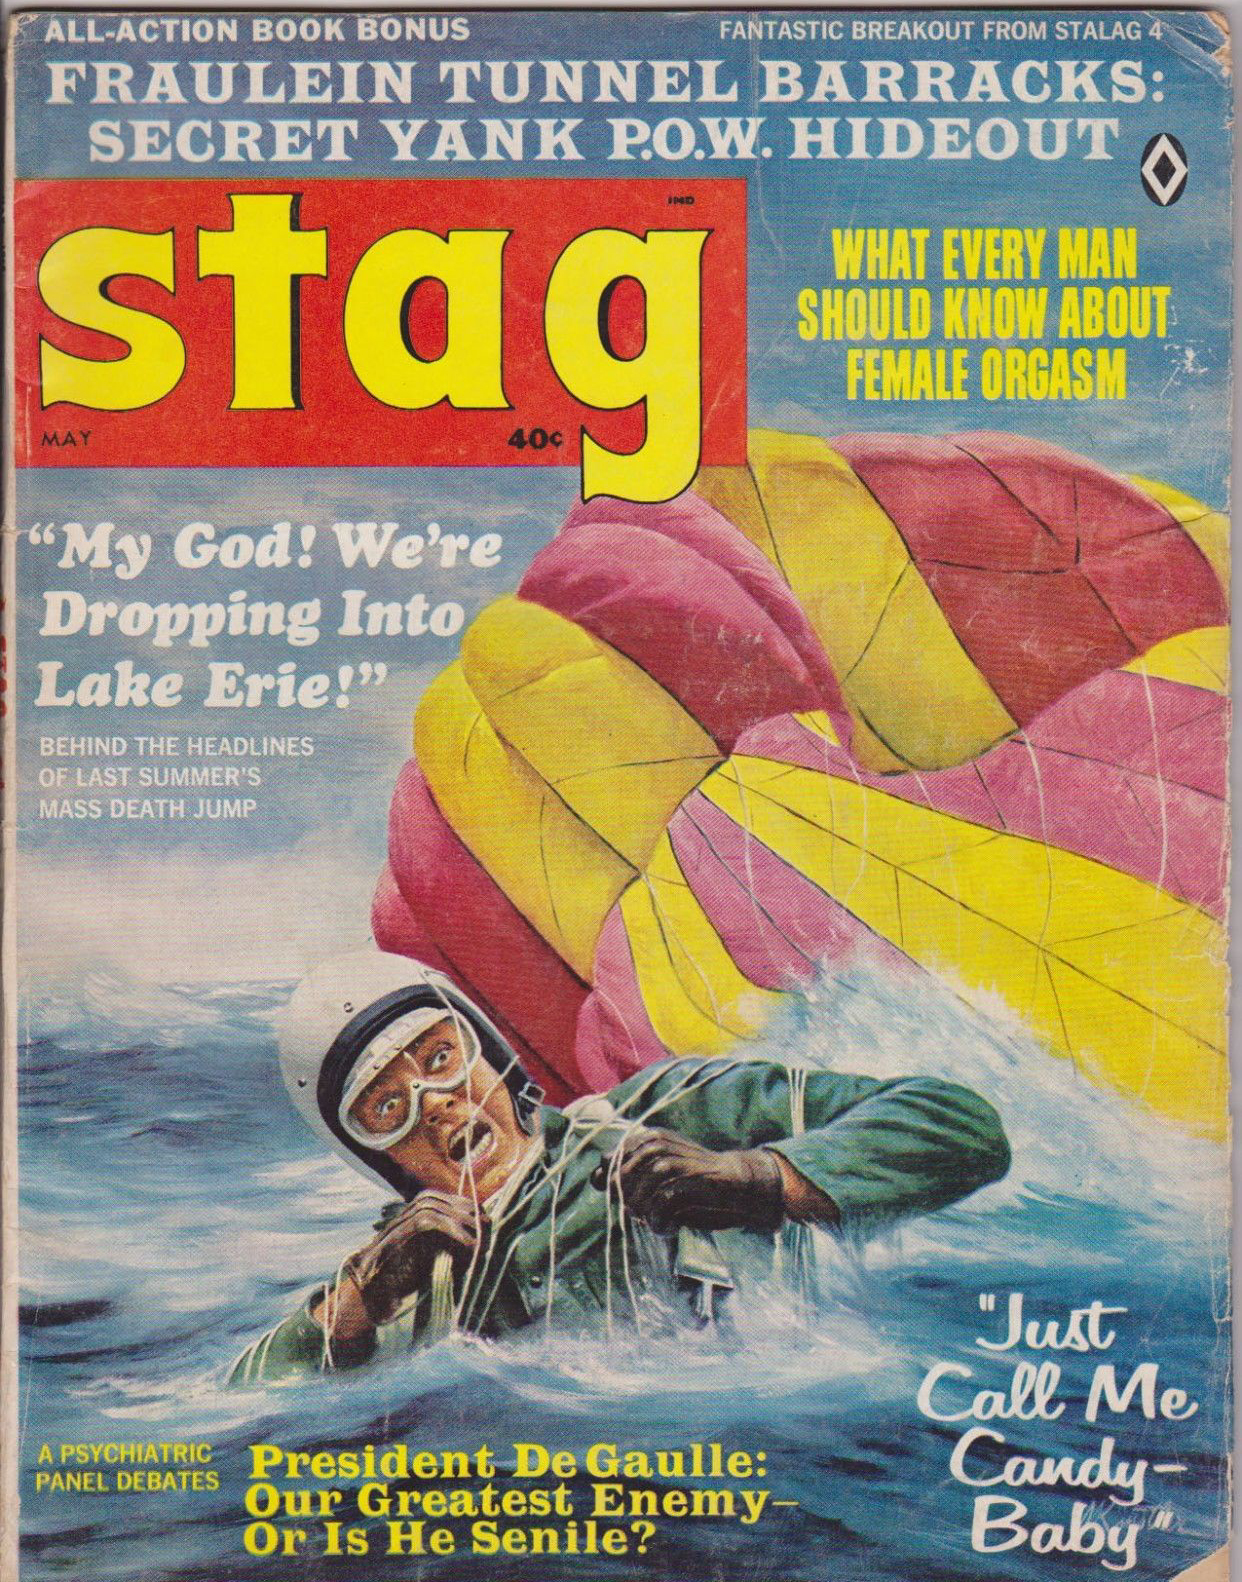 Stag May 1968 magazine back issue Stag magizine back copy Stag May 1968 Magazine for Men Adult Back Issue Published by Leeds Publishing Corp. Fraulein Tunnel Barracks: Secret Yank P.O.W. Hideout.